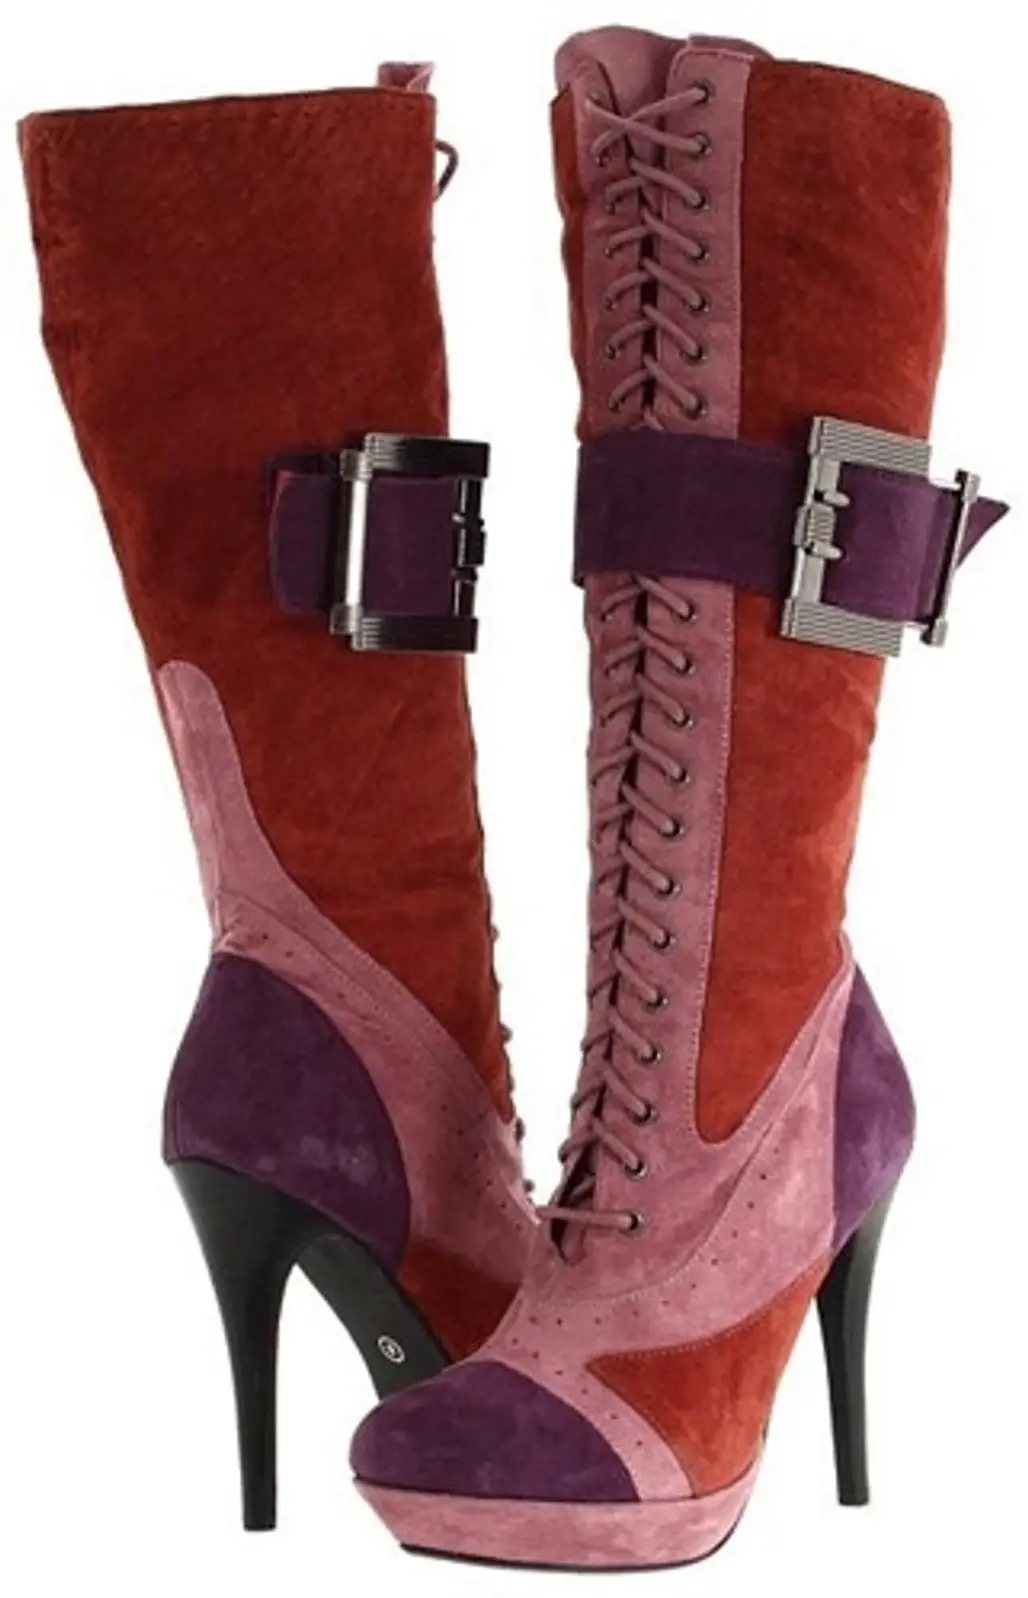 Two Lips Handcuff Color Block Boots